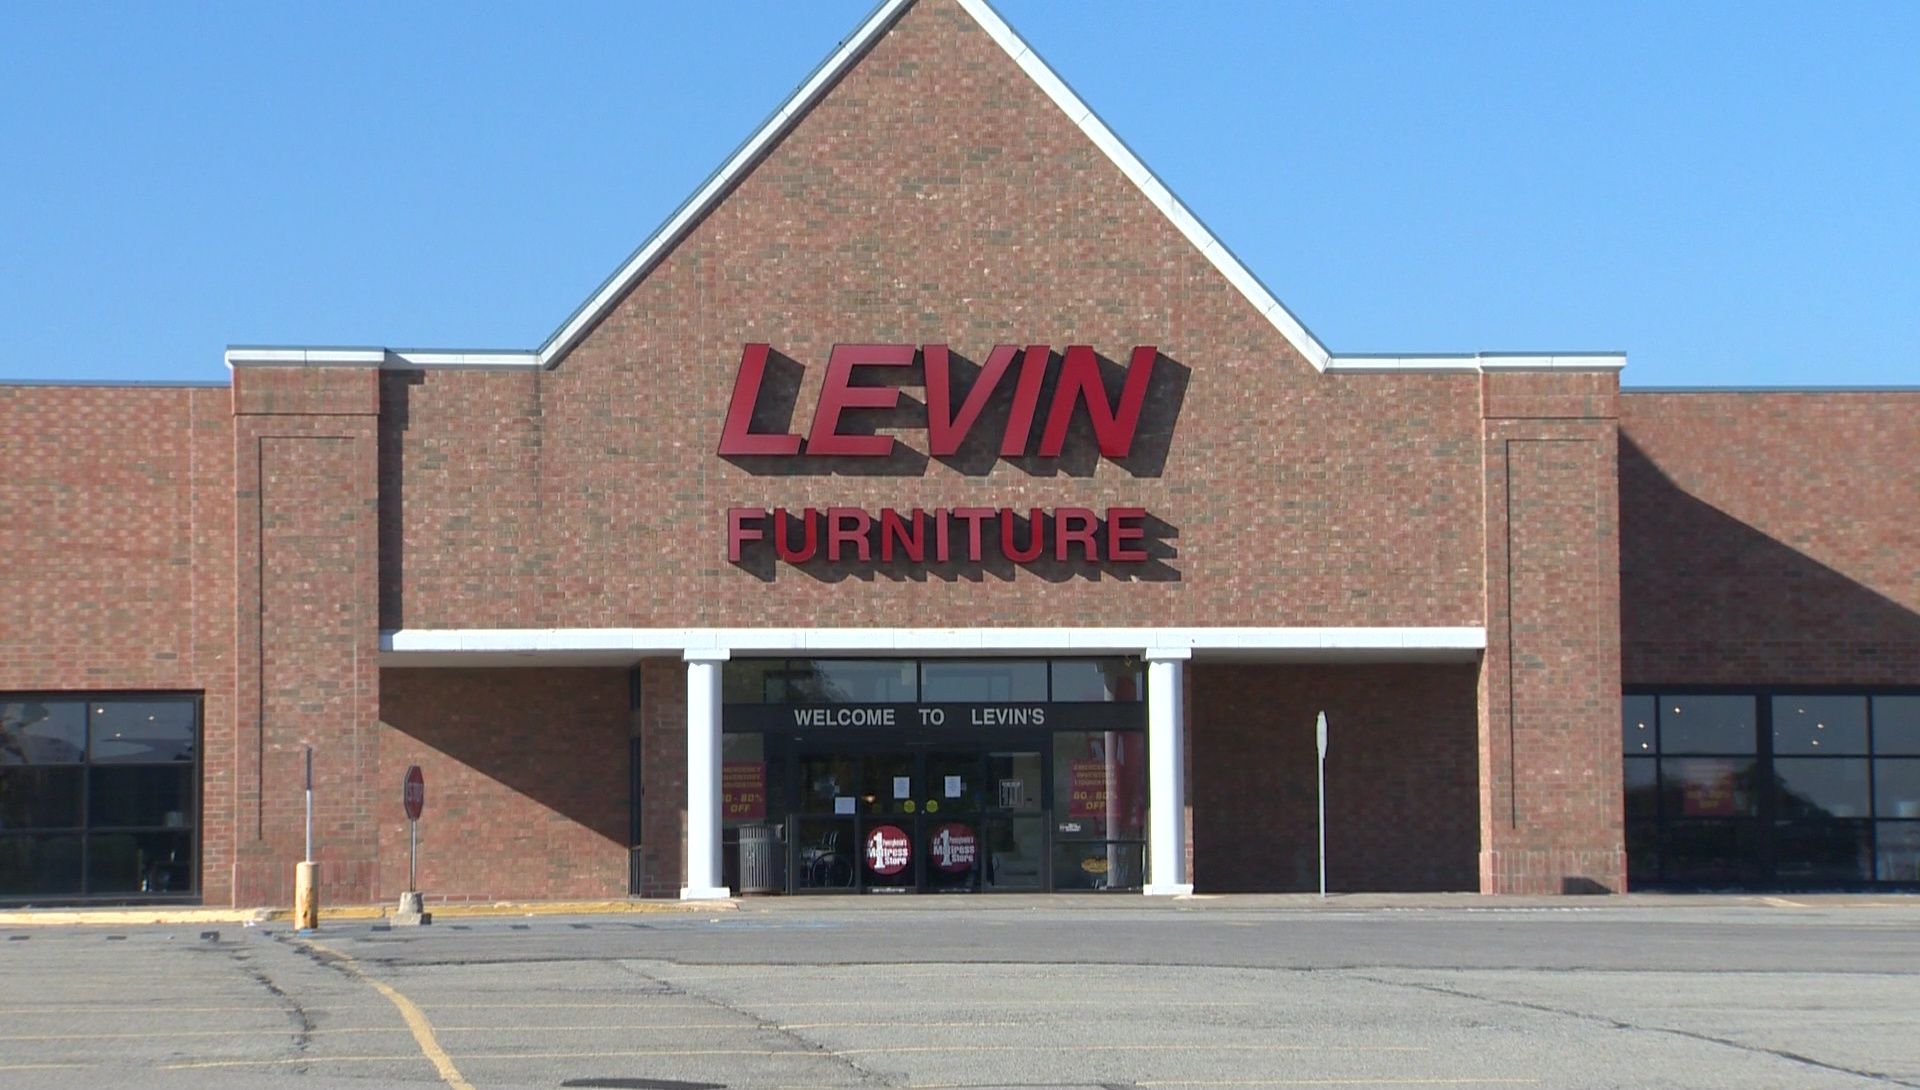 The Pittsburgh Based Levin Furniture Chain Is Being Sold